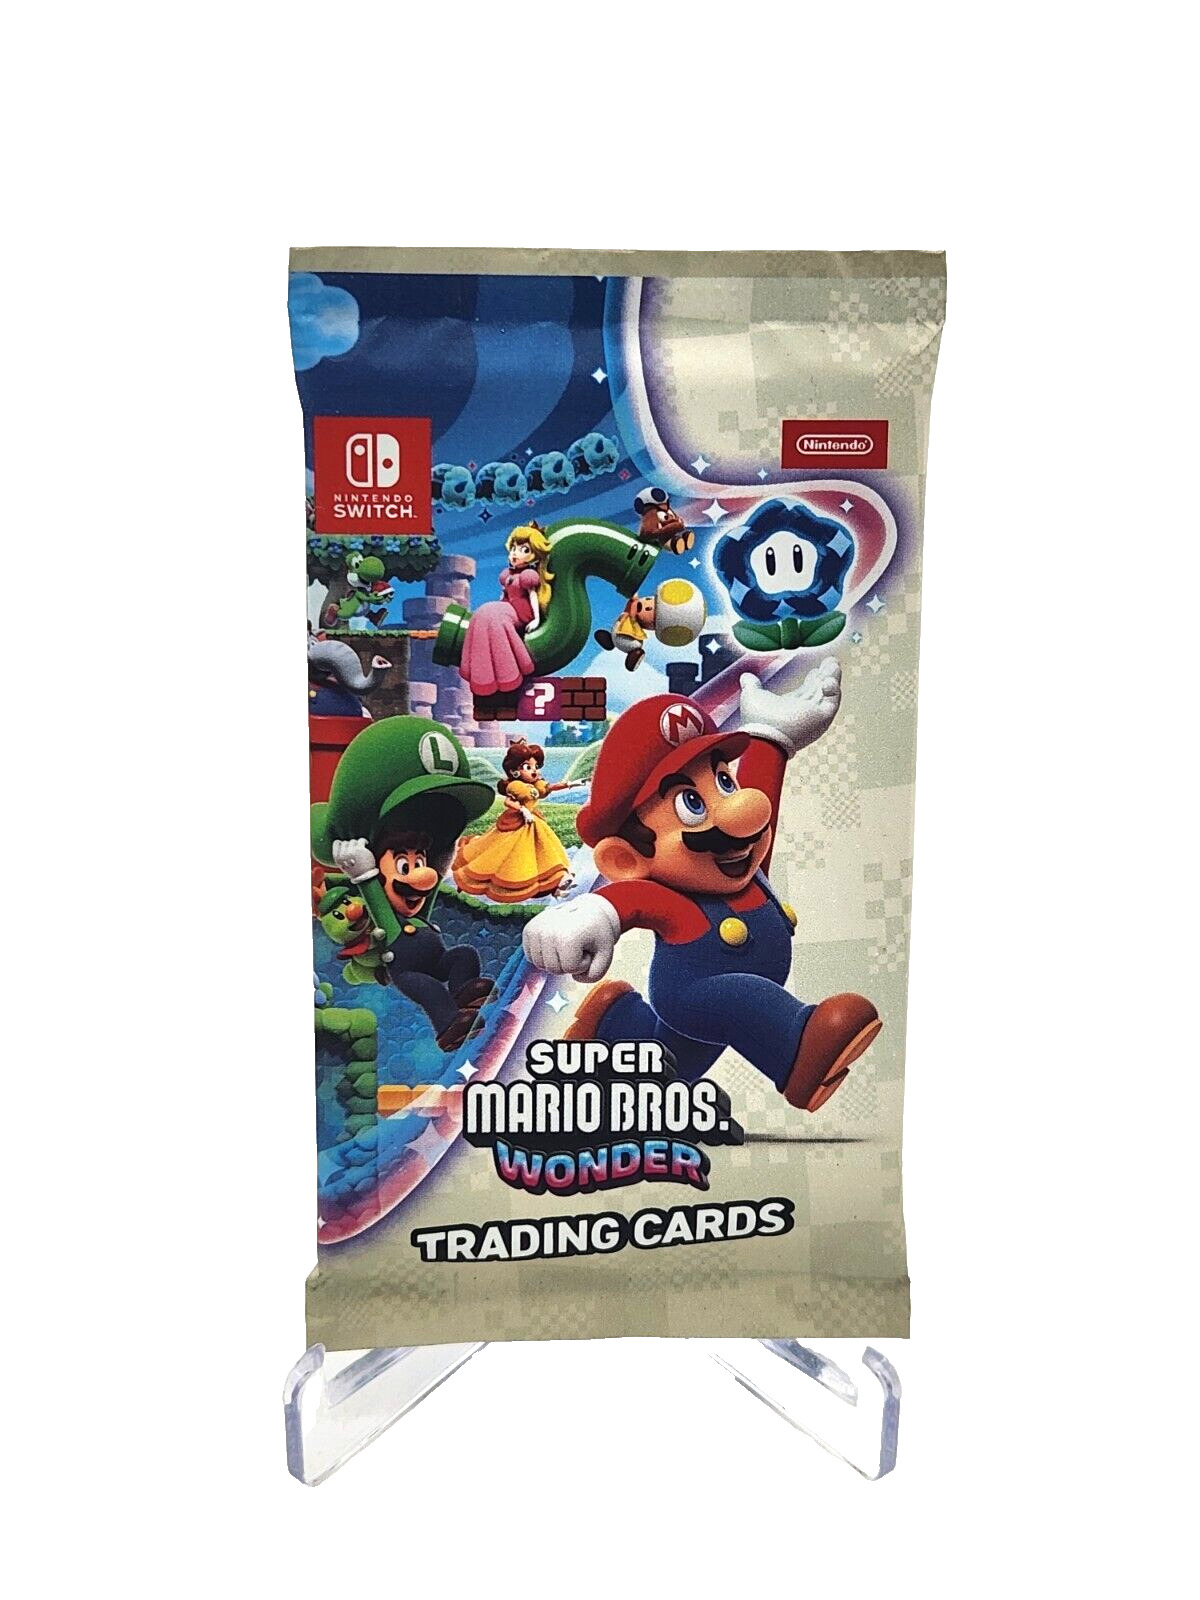 Super Mario Bros Wonder - Trading Card PACK ONLY - Brand New Factory Sealed